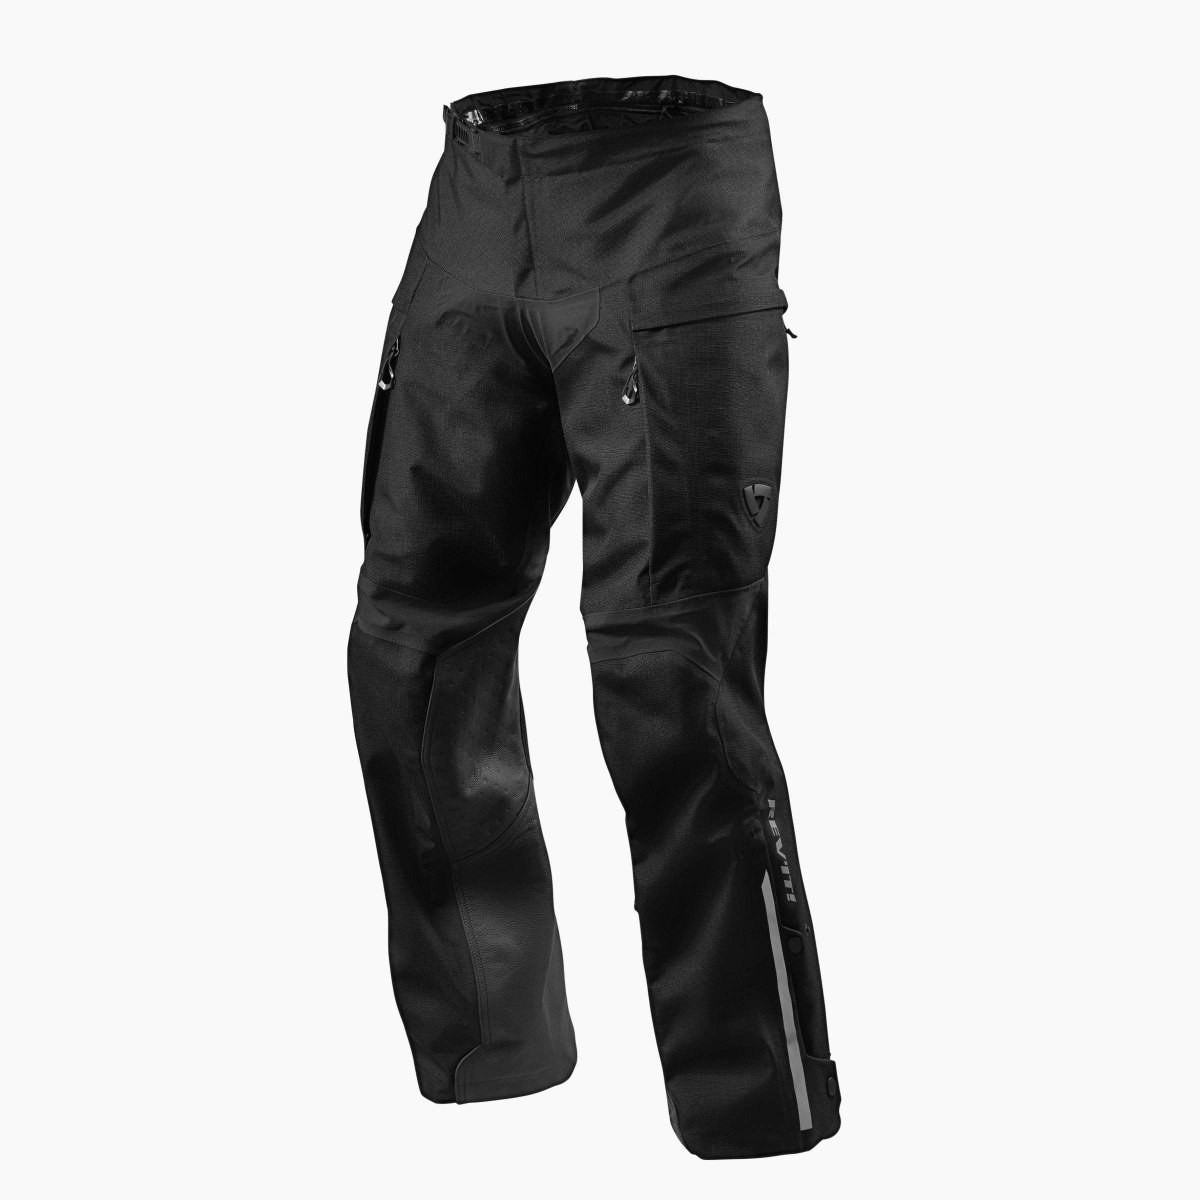 Image of EU REV'IT! Component H2O Long Black Motorcycle Pants Taille L